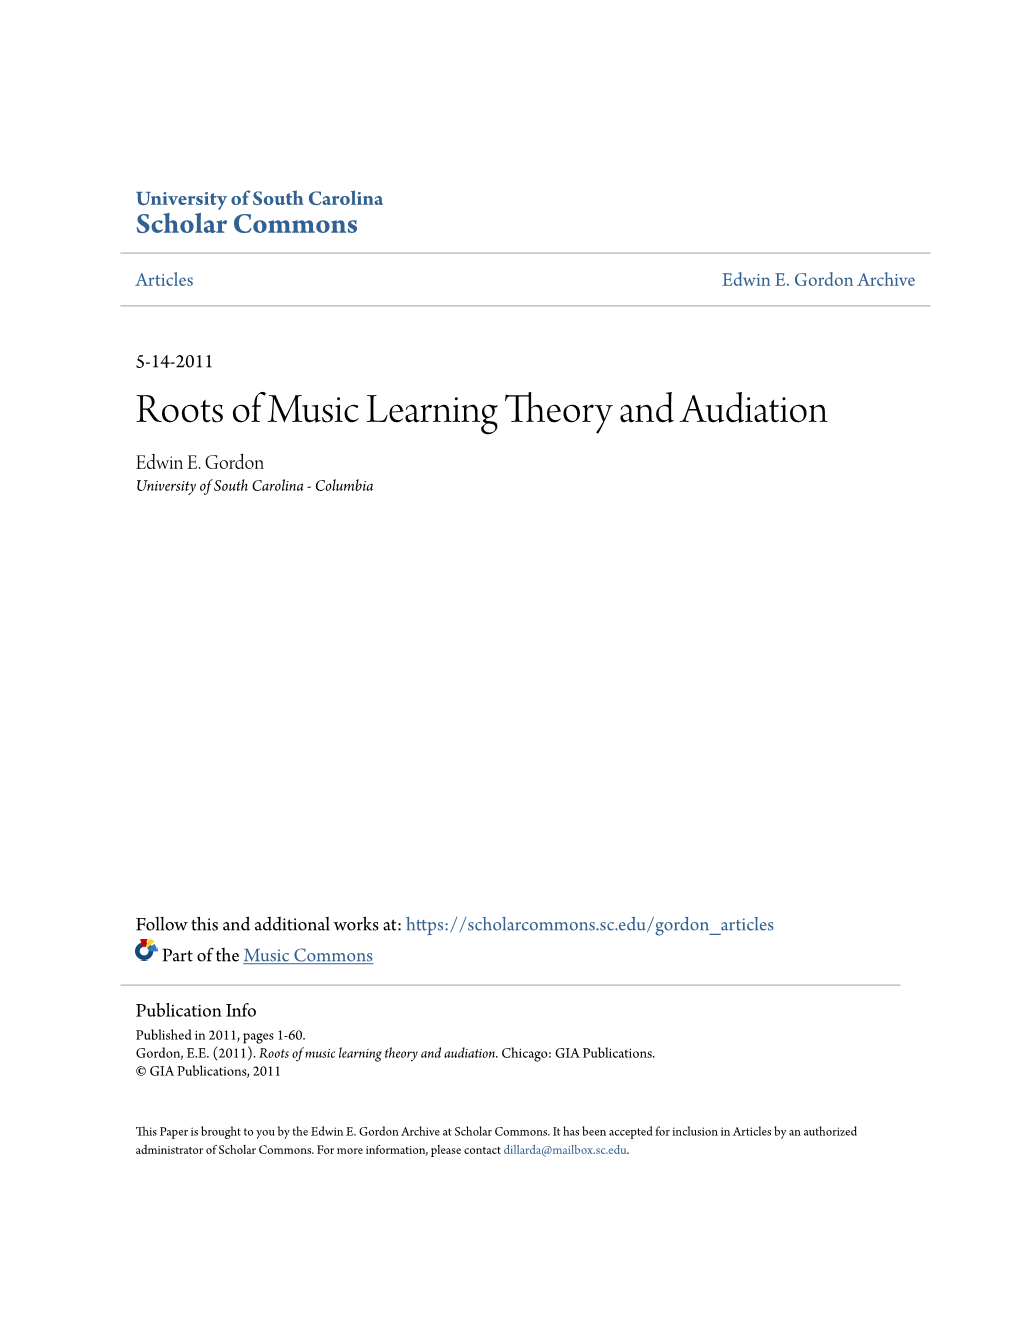 Roots of Music Learning Theory and Audiation Edwin E